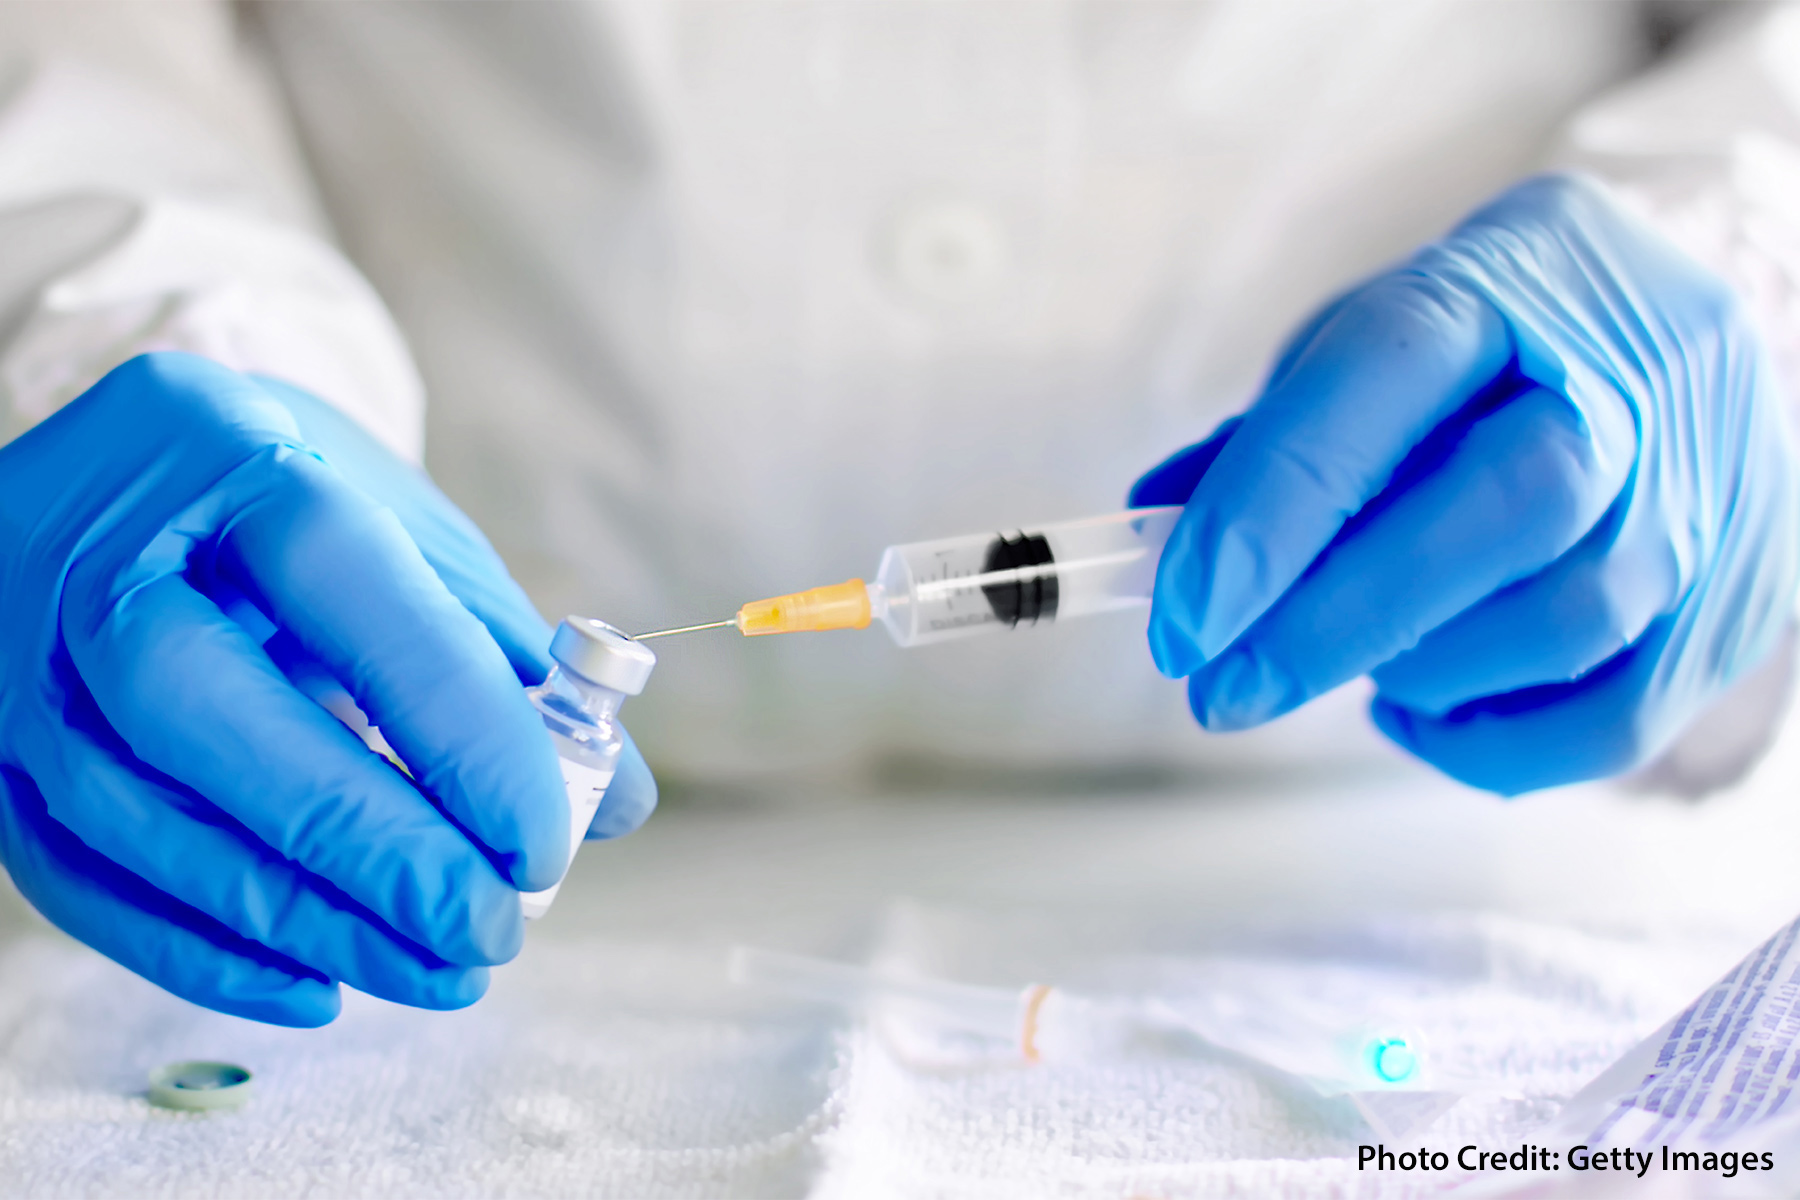 Black Americans Getting Vaccinated at Lower Rates